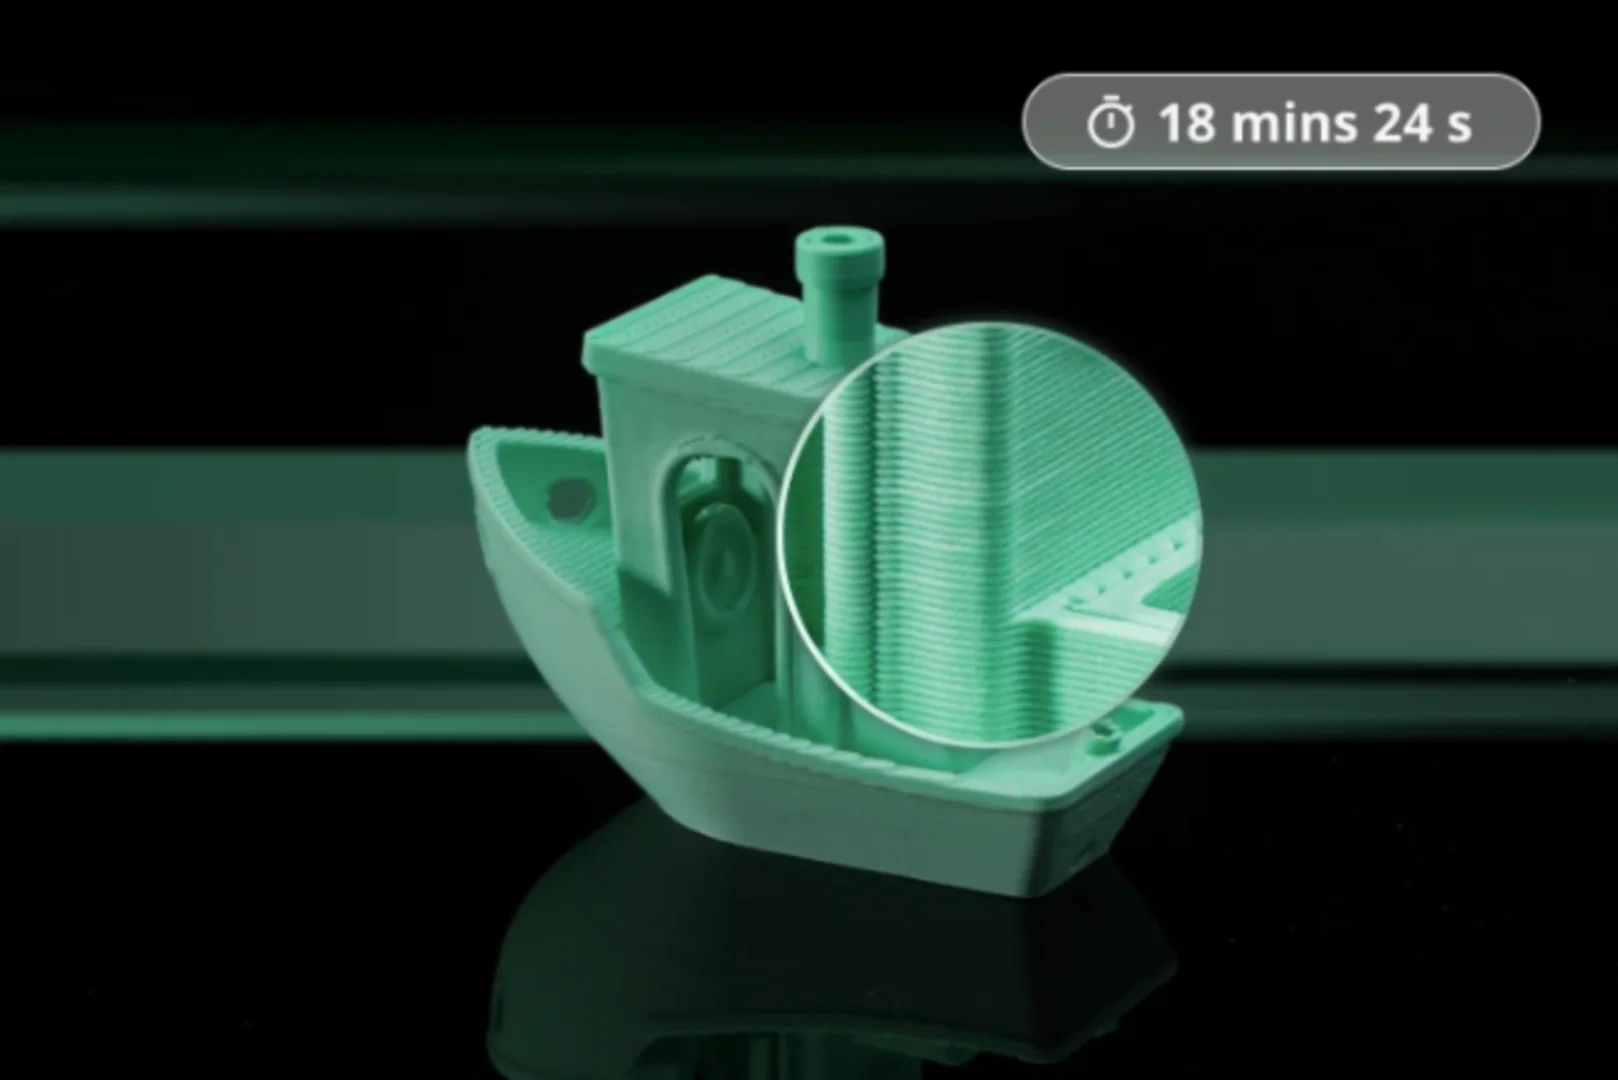 Sample print of Benchy that took 18 minutes to complete